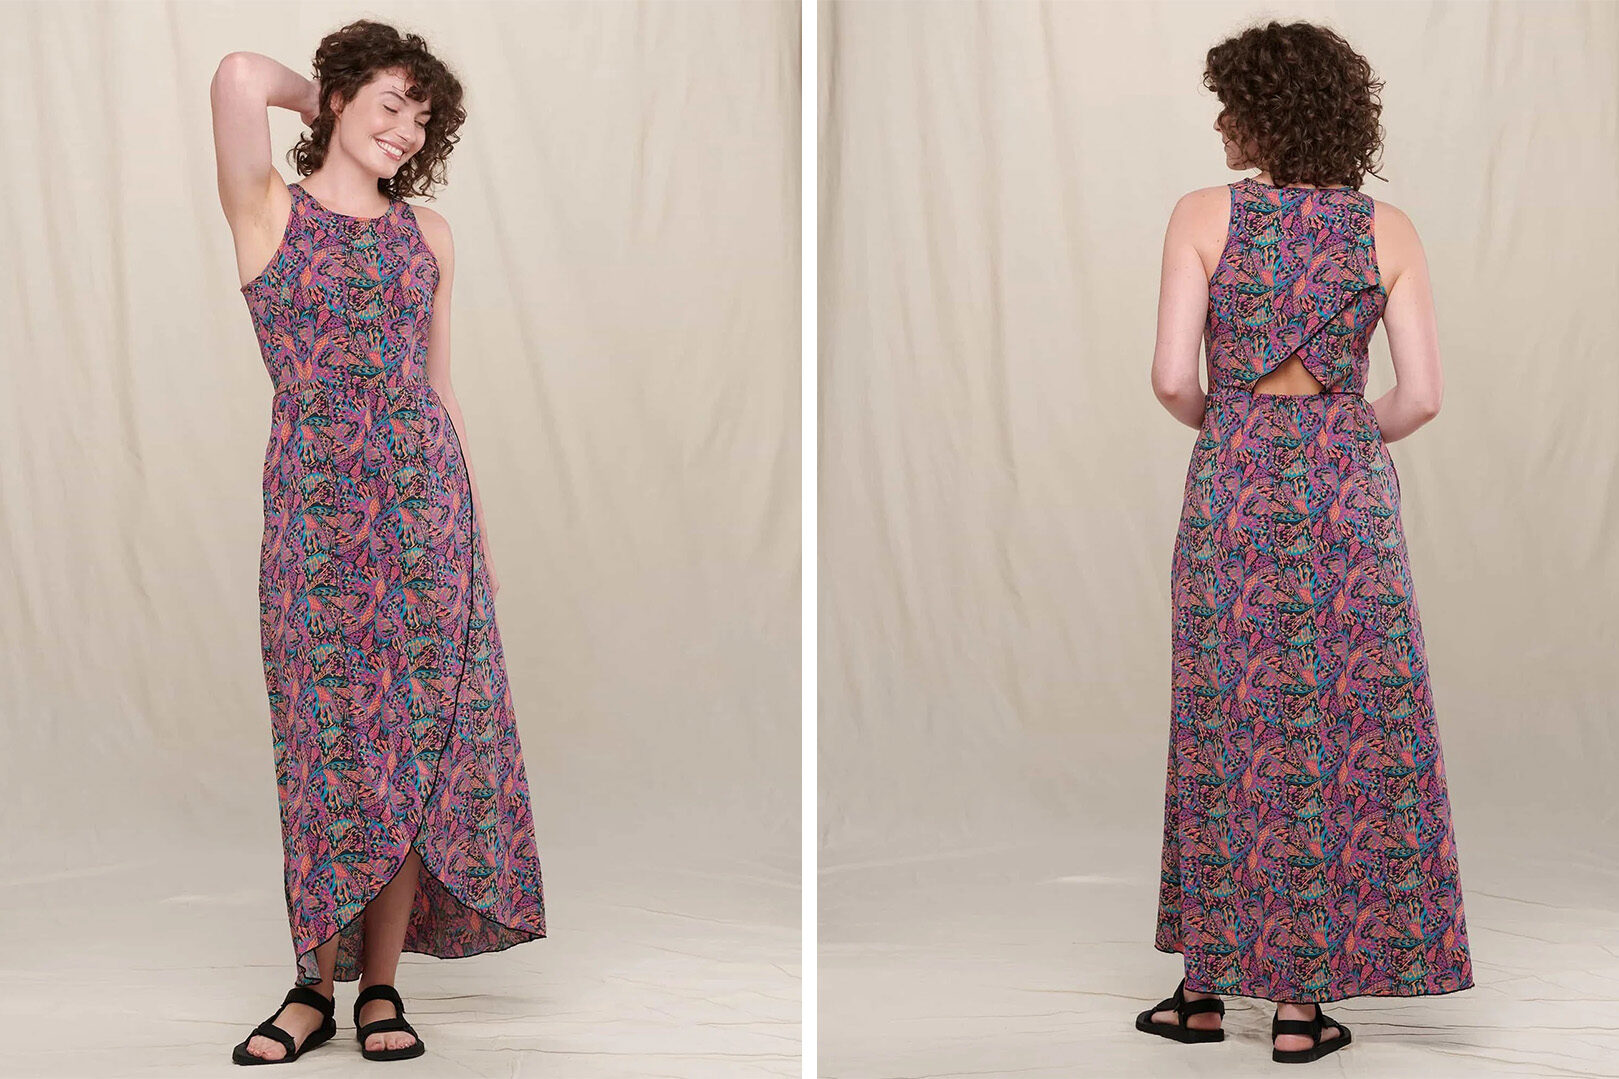 Model showing two angles of the Toad & Co Sunkissed Maxi Dress